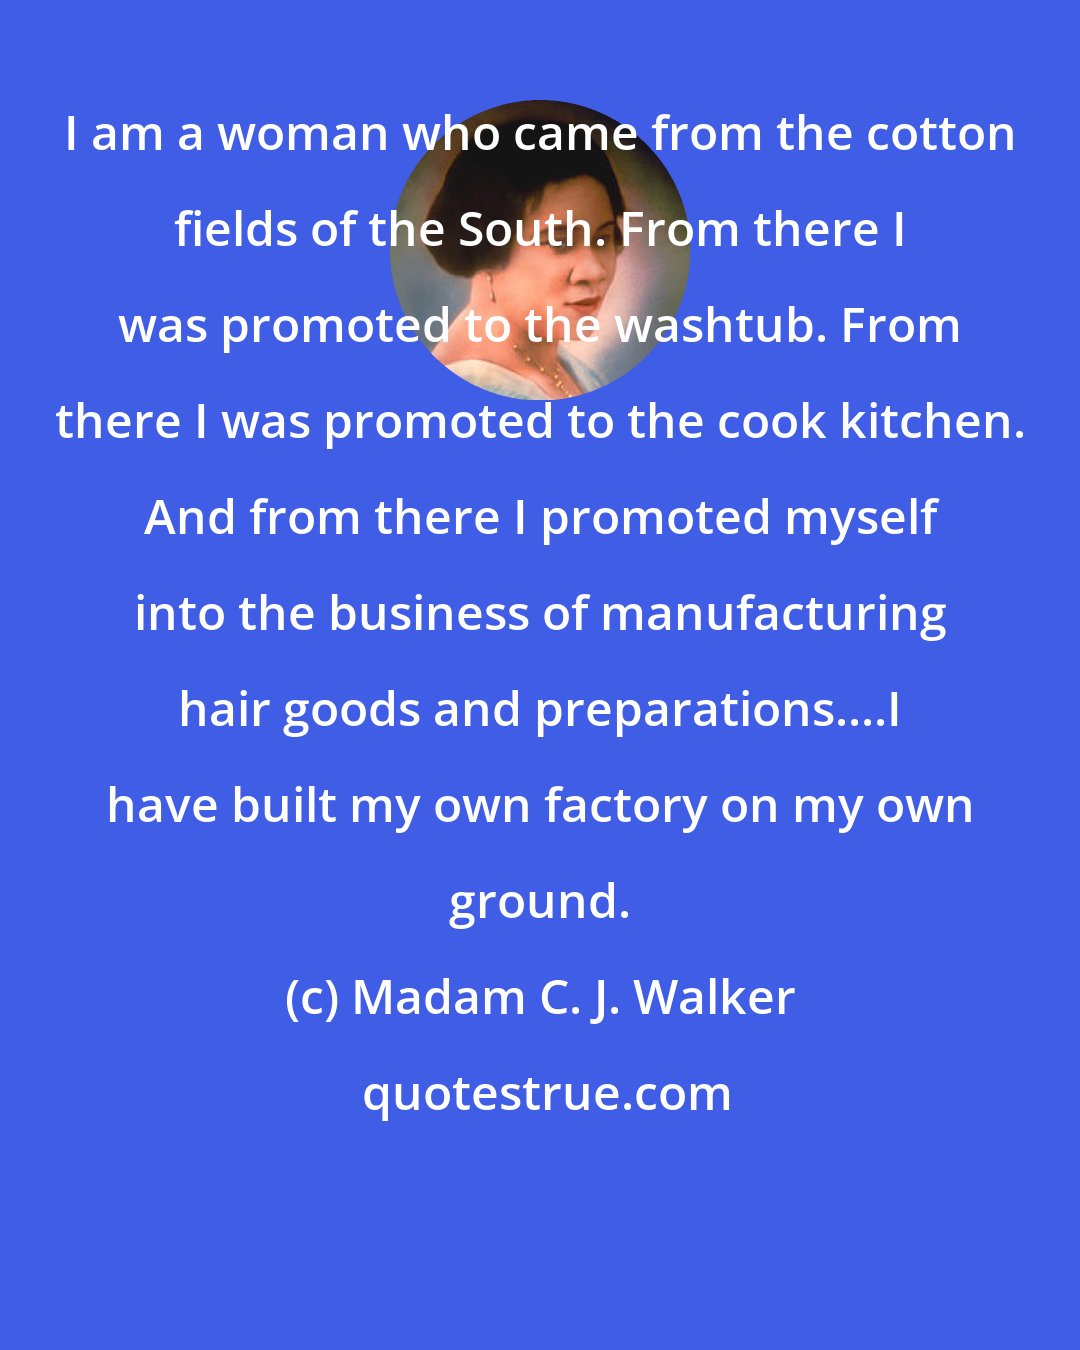 Madam C. J. Walker: I am a woman who came from the cotton fields of the South. From there I was promoted to the washtub. From there I was promoted to the cook kitchen. And from there I promoted myself into the business of manufacturing hair goods and preparations....I have built my own factory on my own ground.